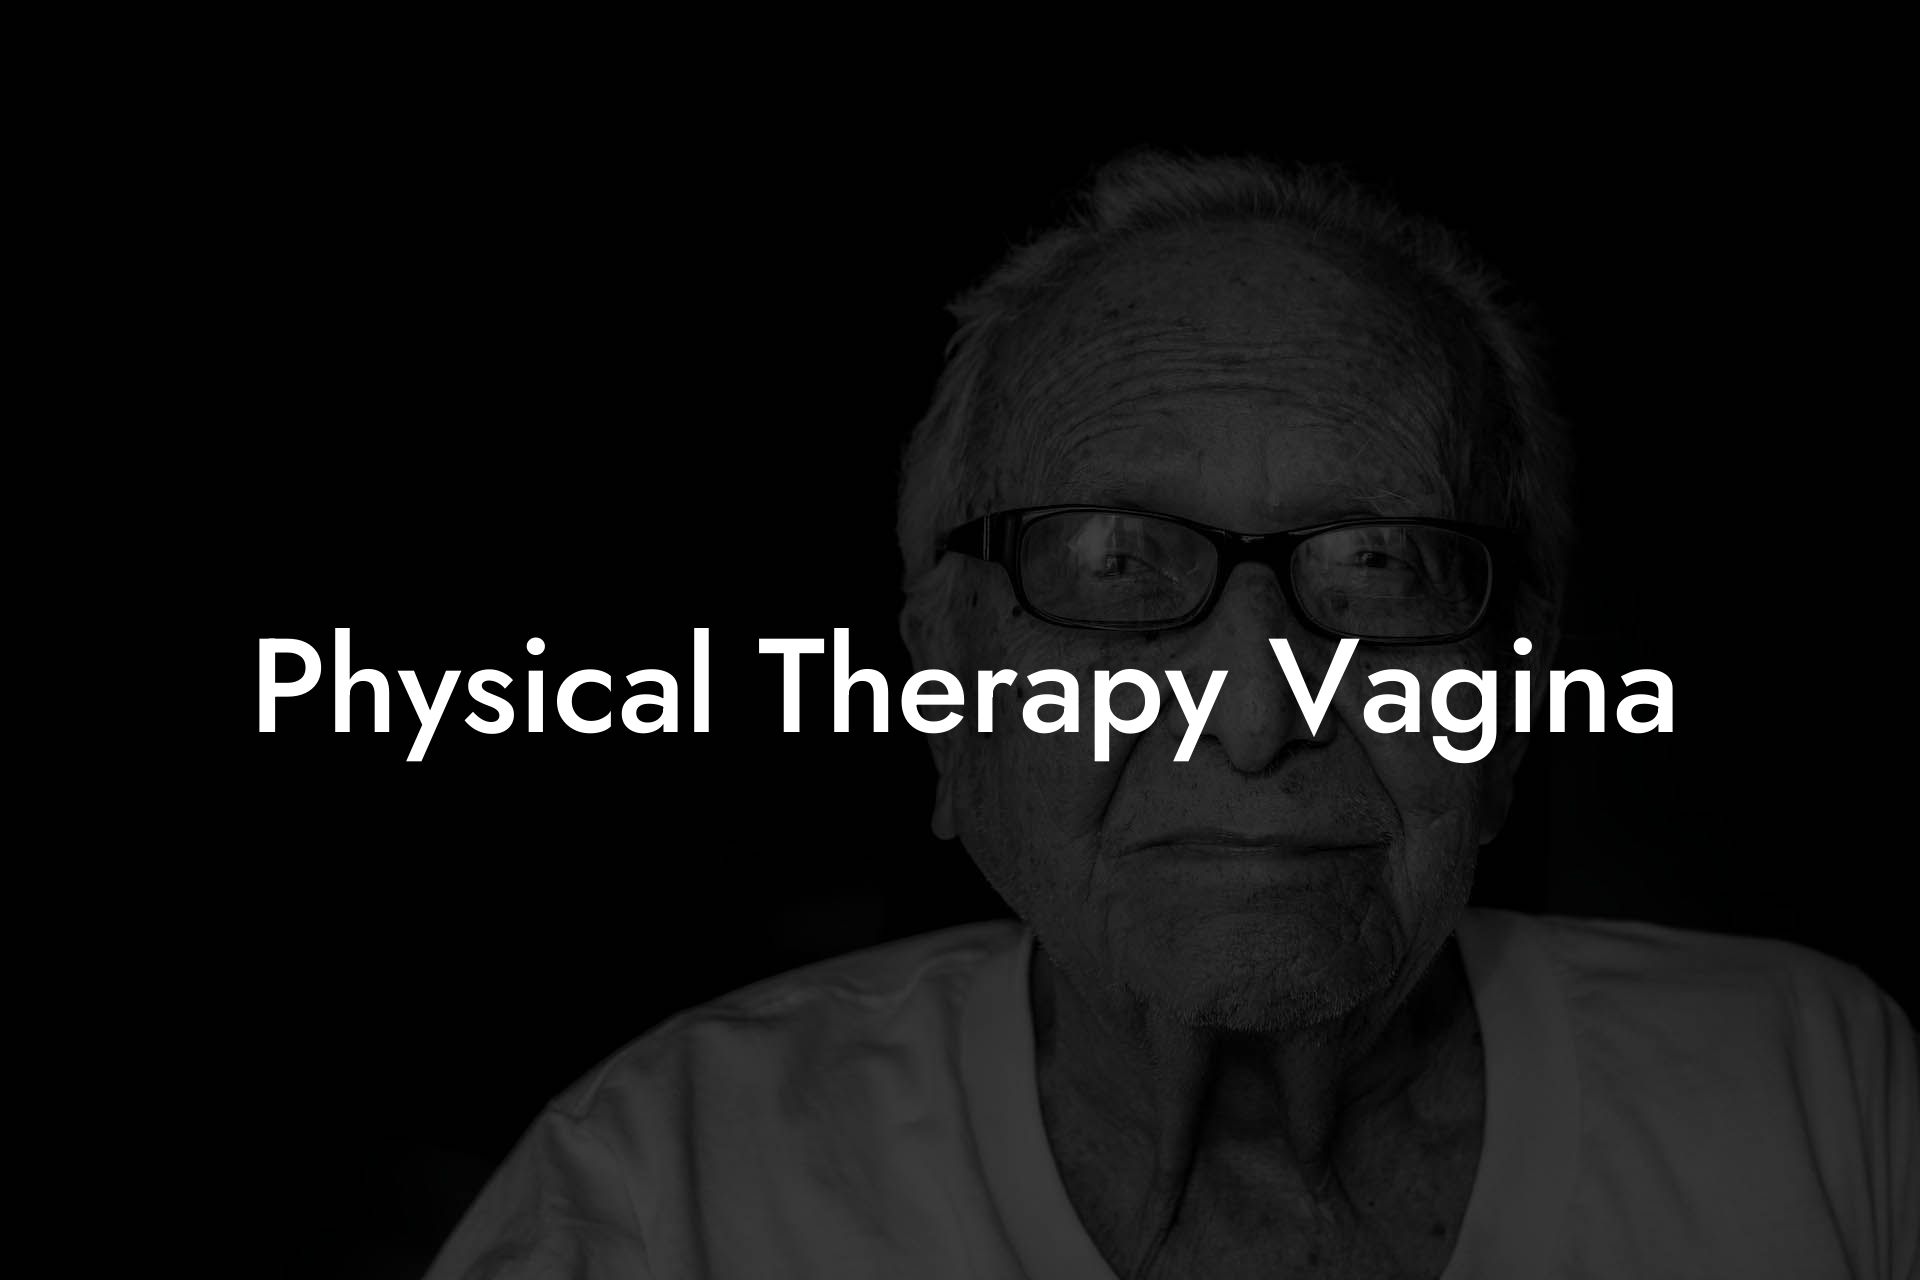 Physical Therapy Vagina